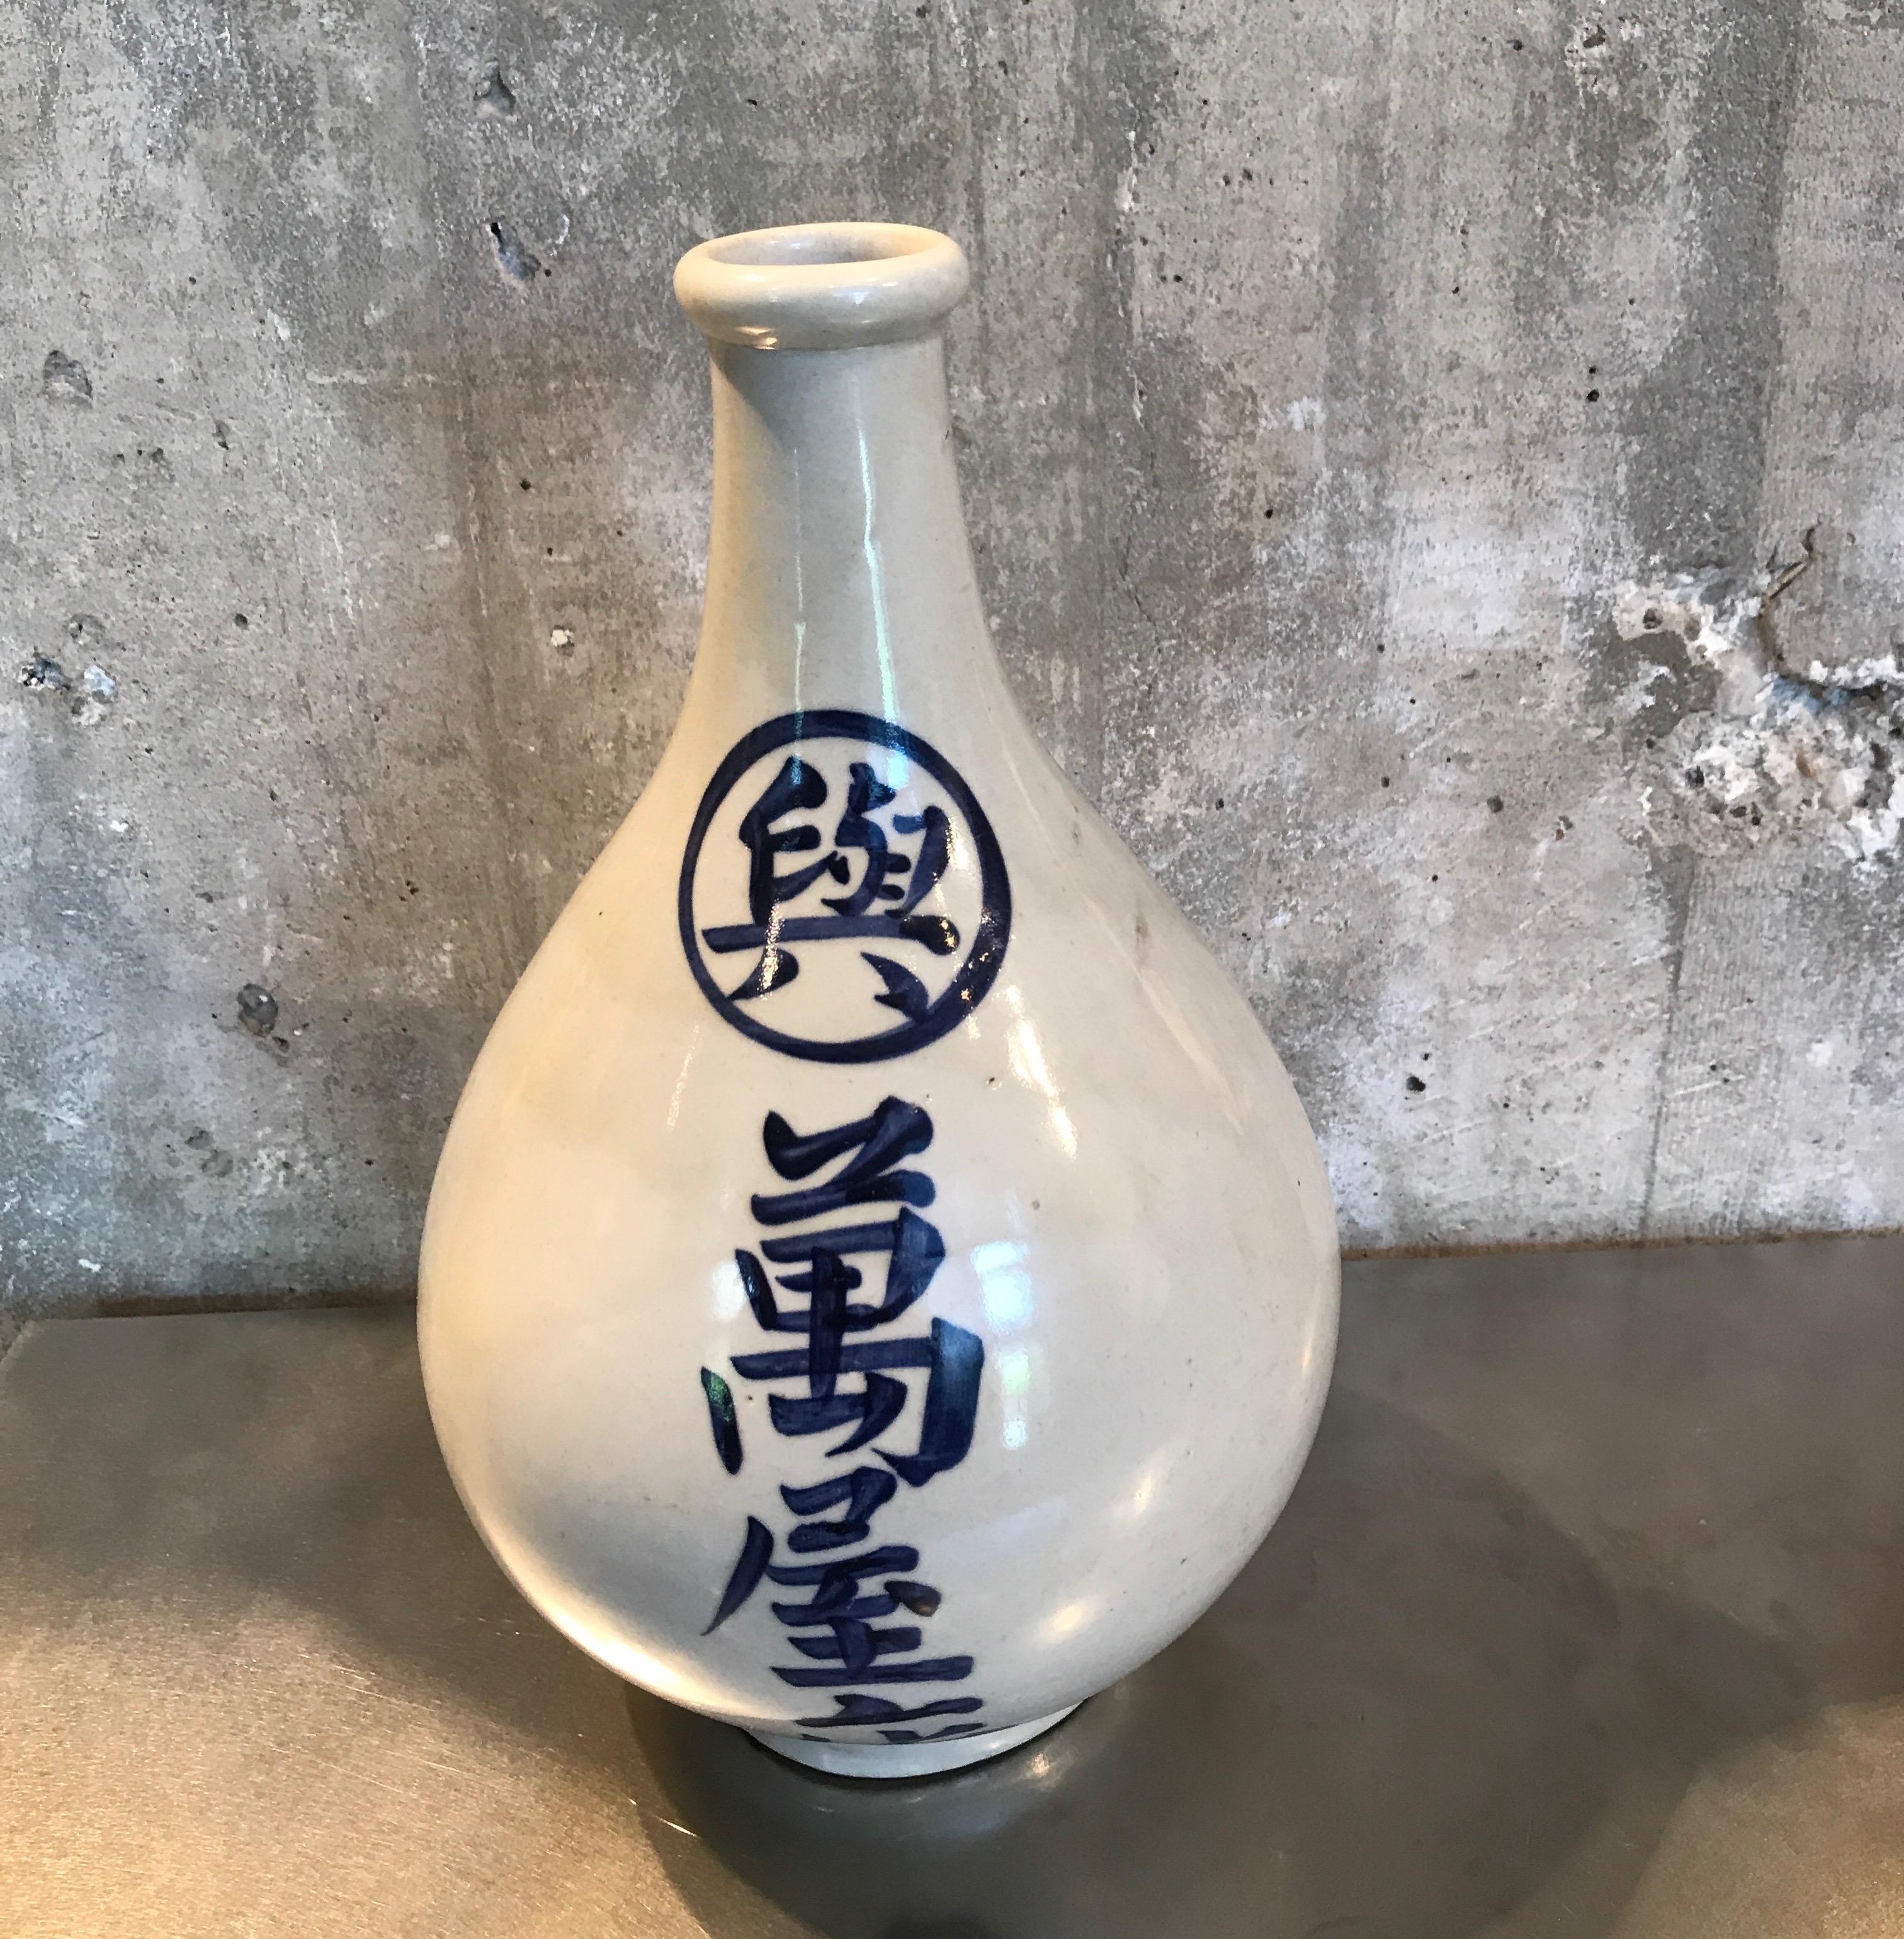 Vintage Japanese Sake Bottle with Hand Painted Calligraphy 3